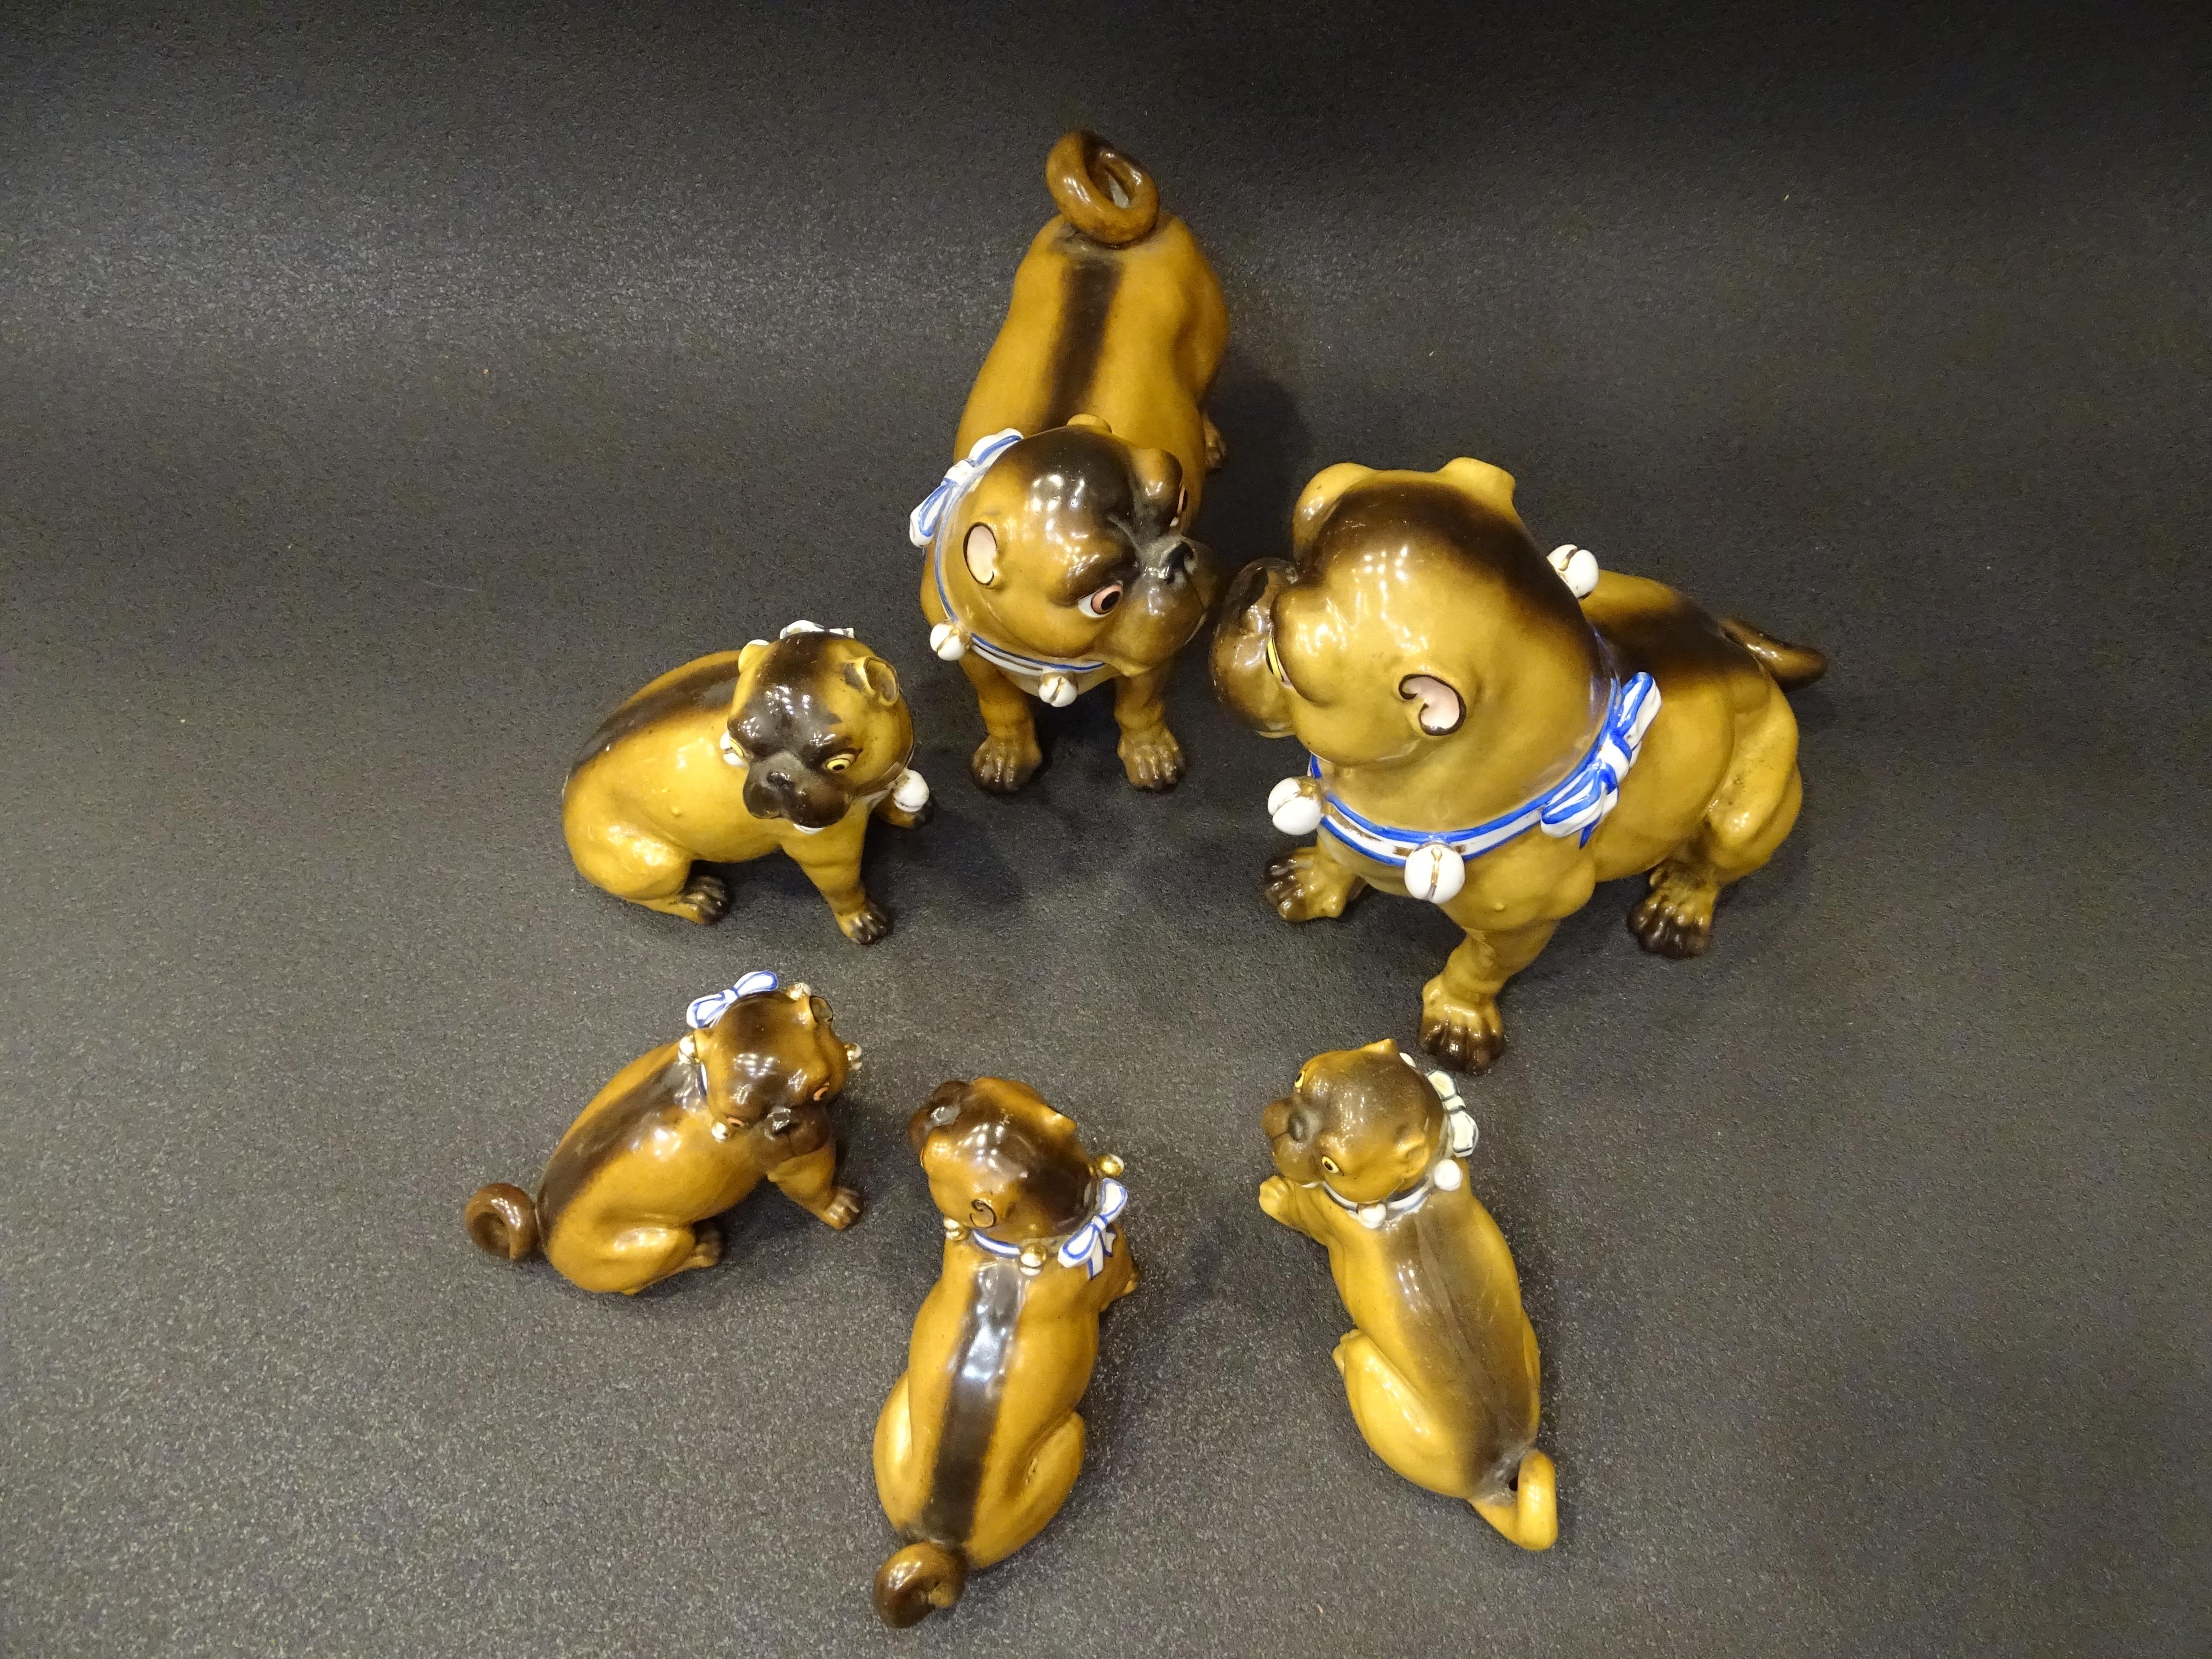 Pug Dogs 19th Century 6 Germany Porcelain, Sculpture 6